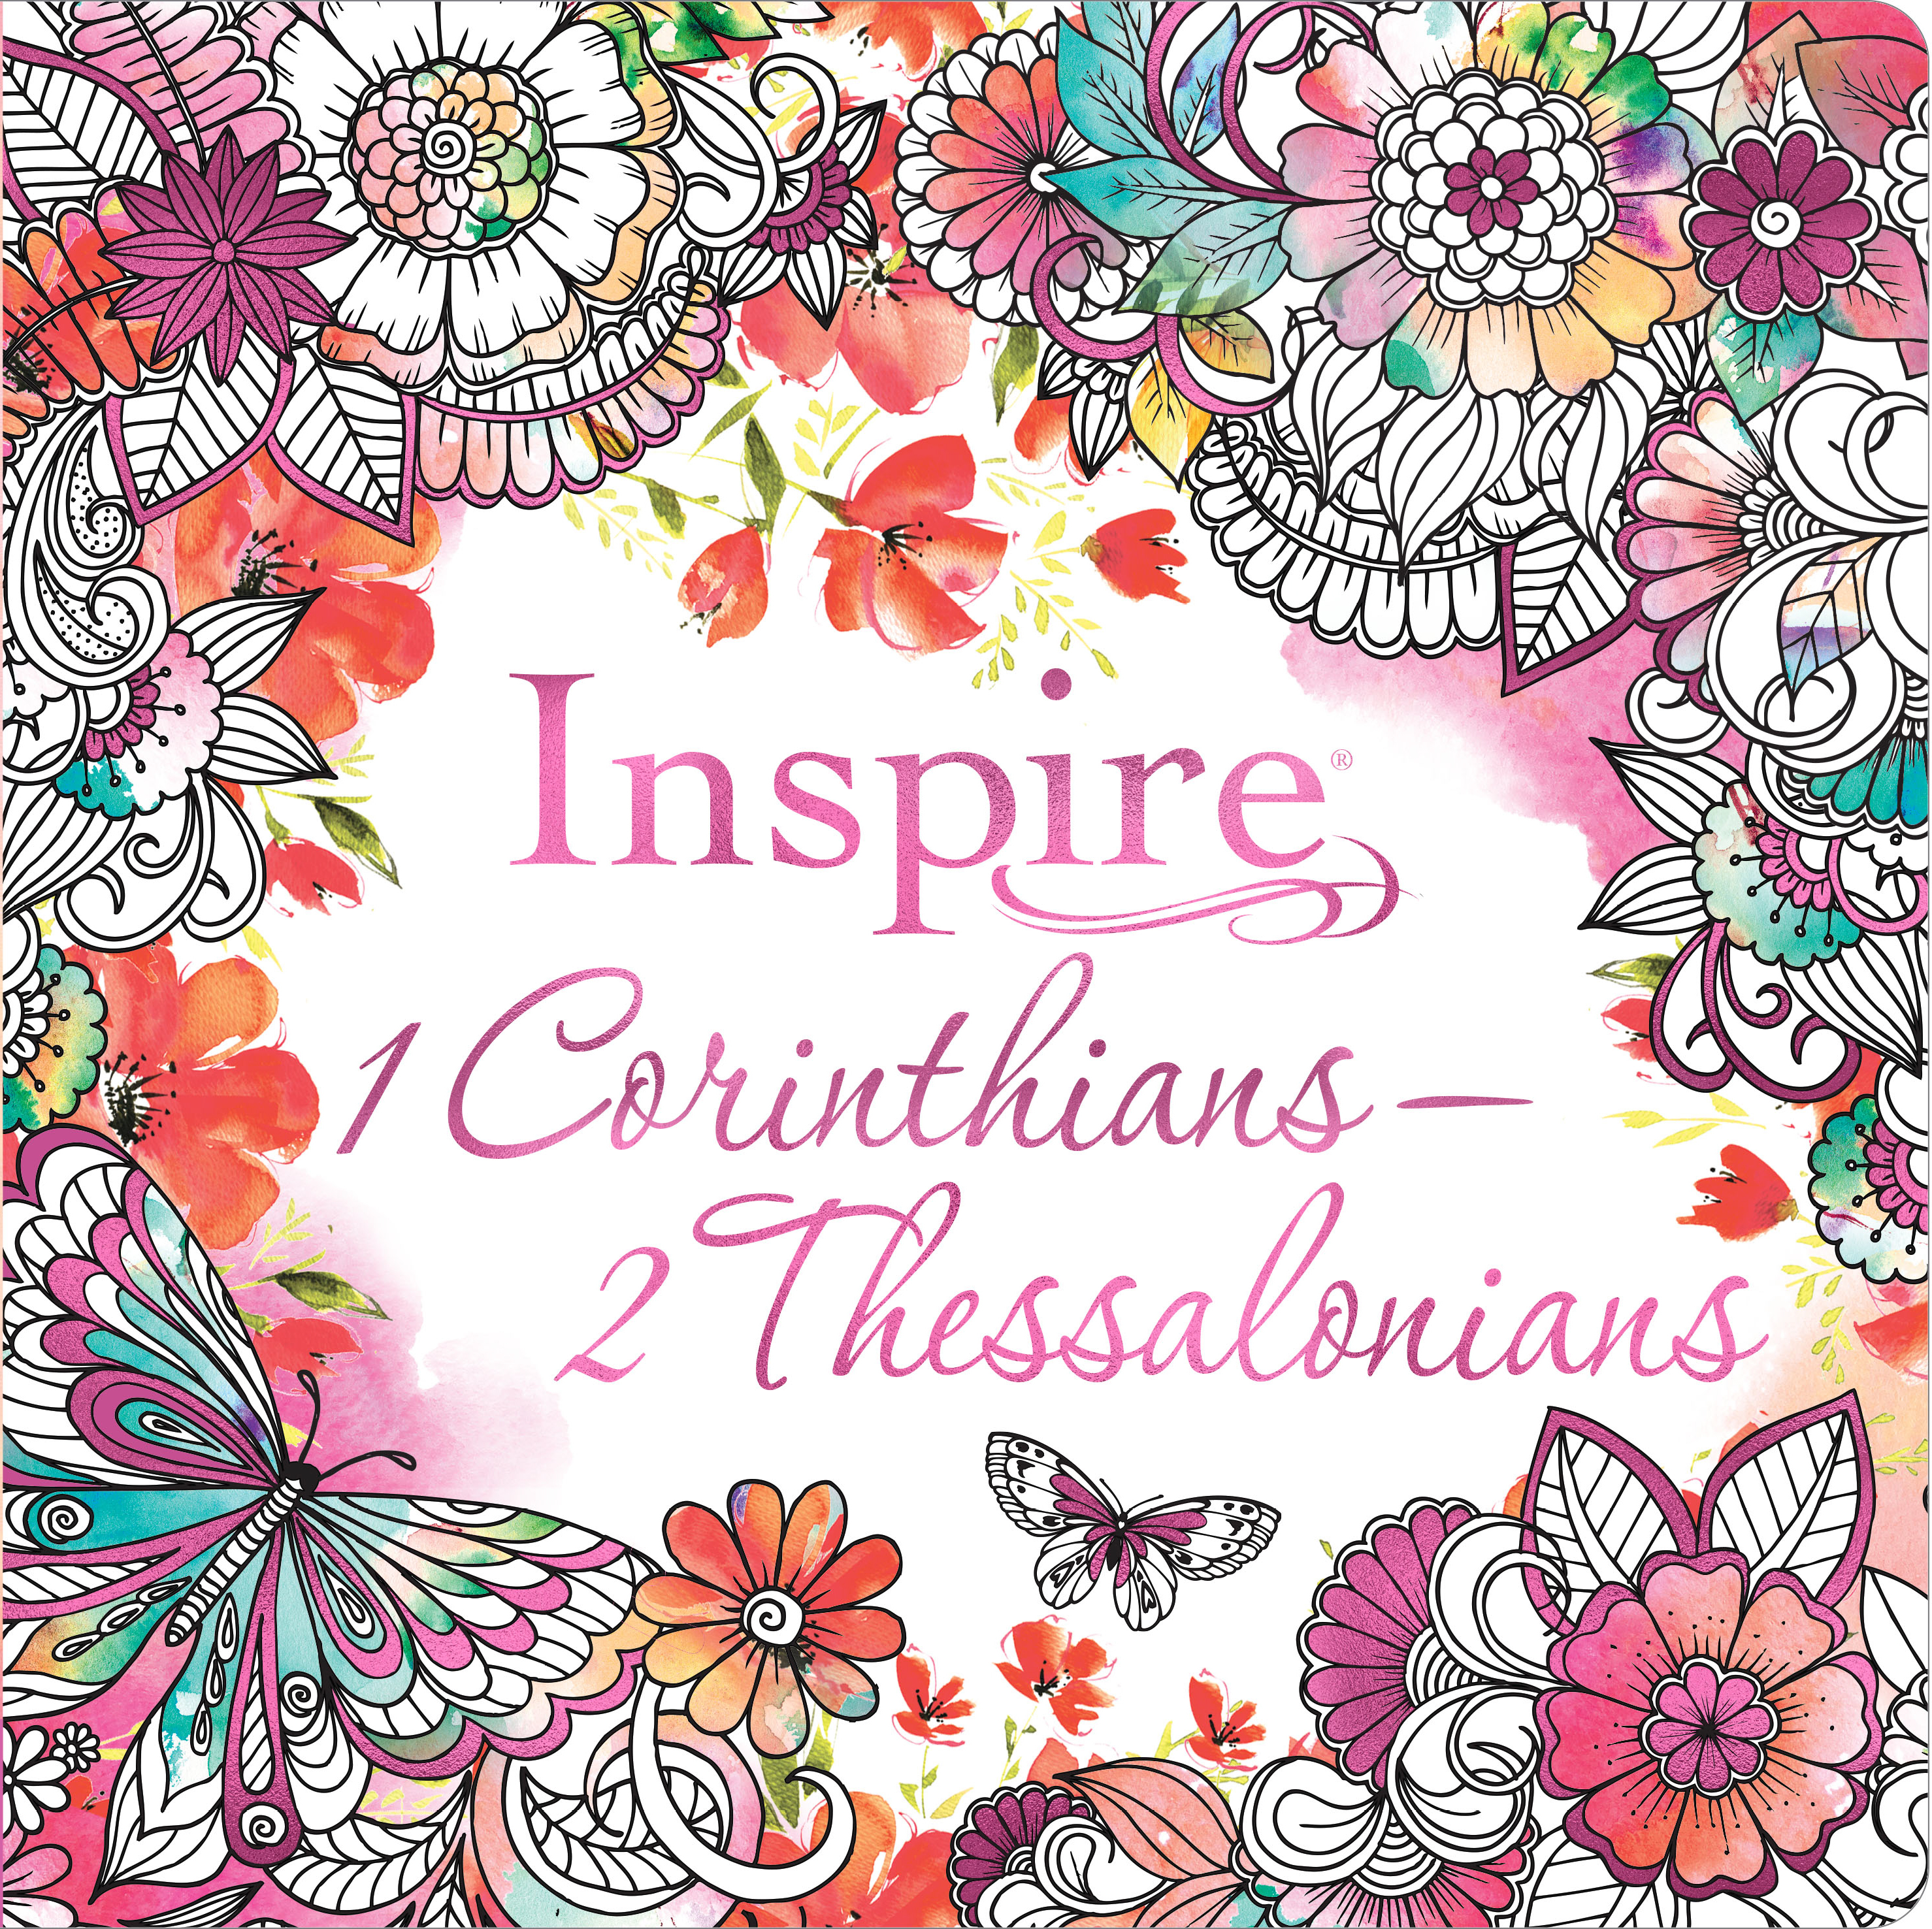 Inspire: 1 Corinthians--2 Thessalonians (Softcover)